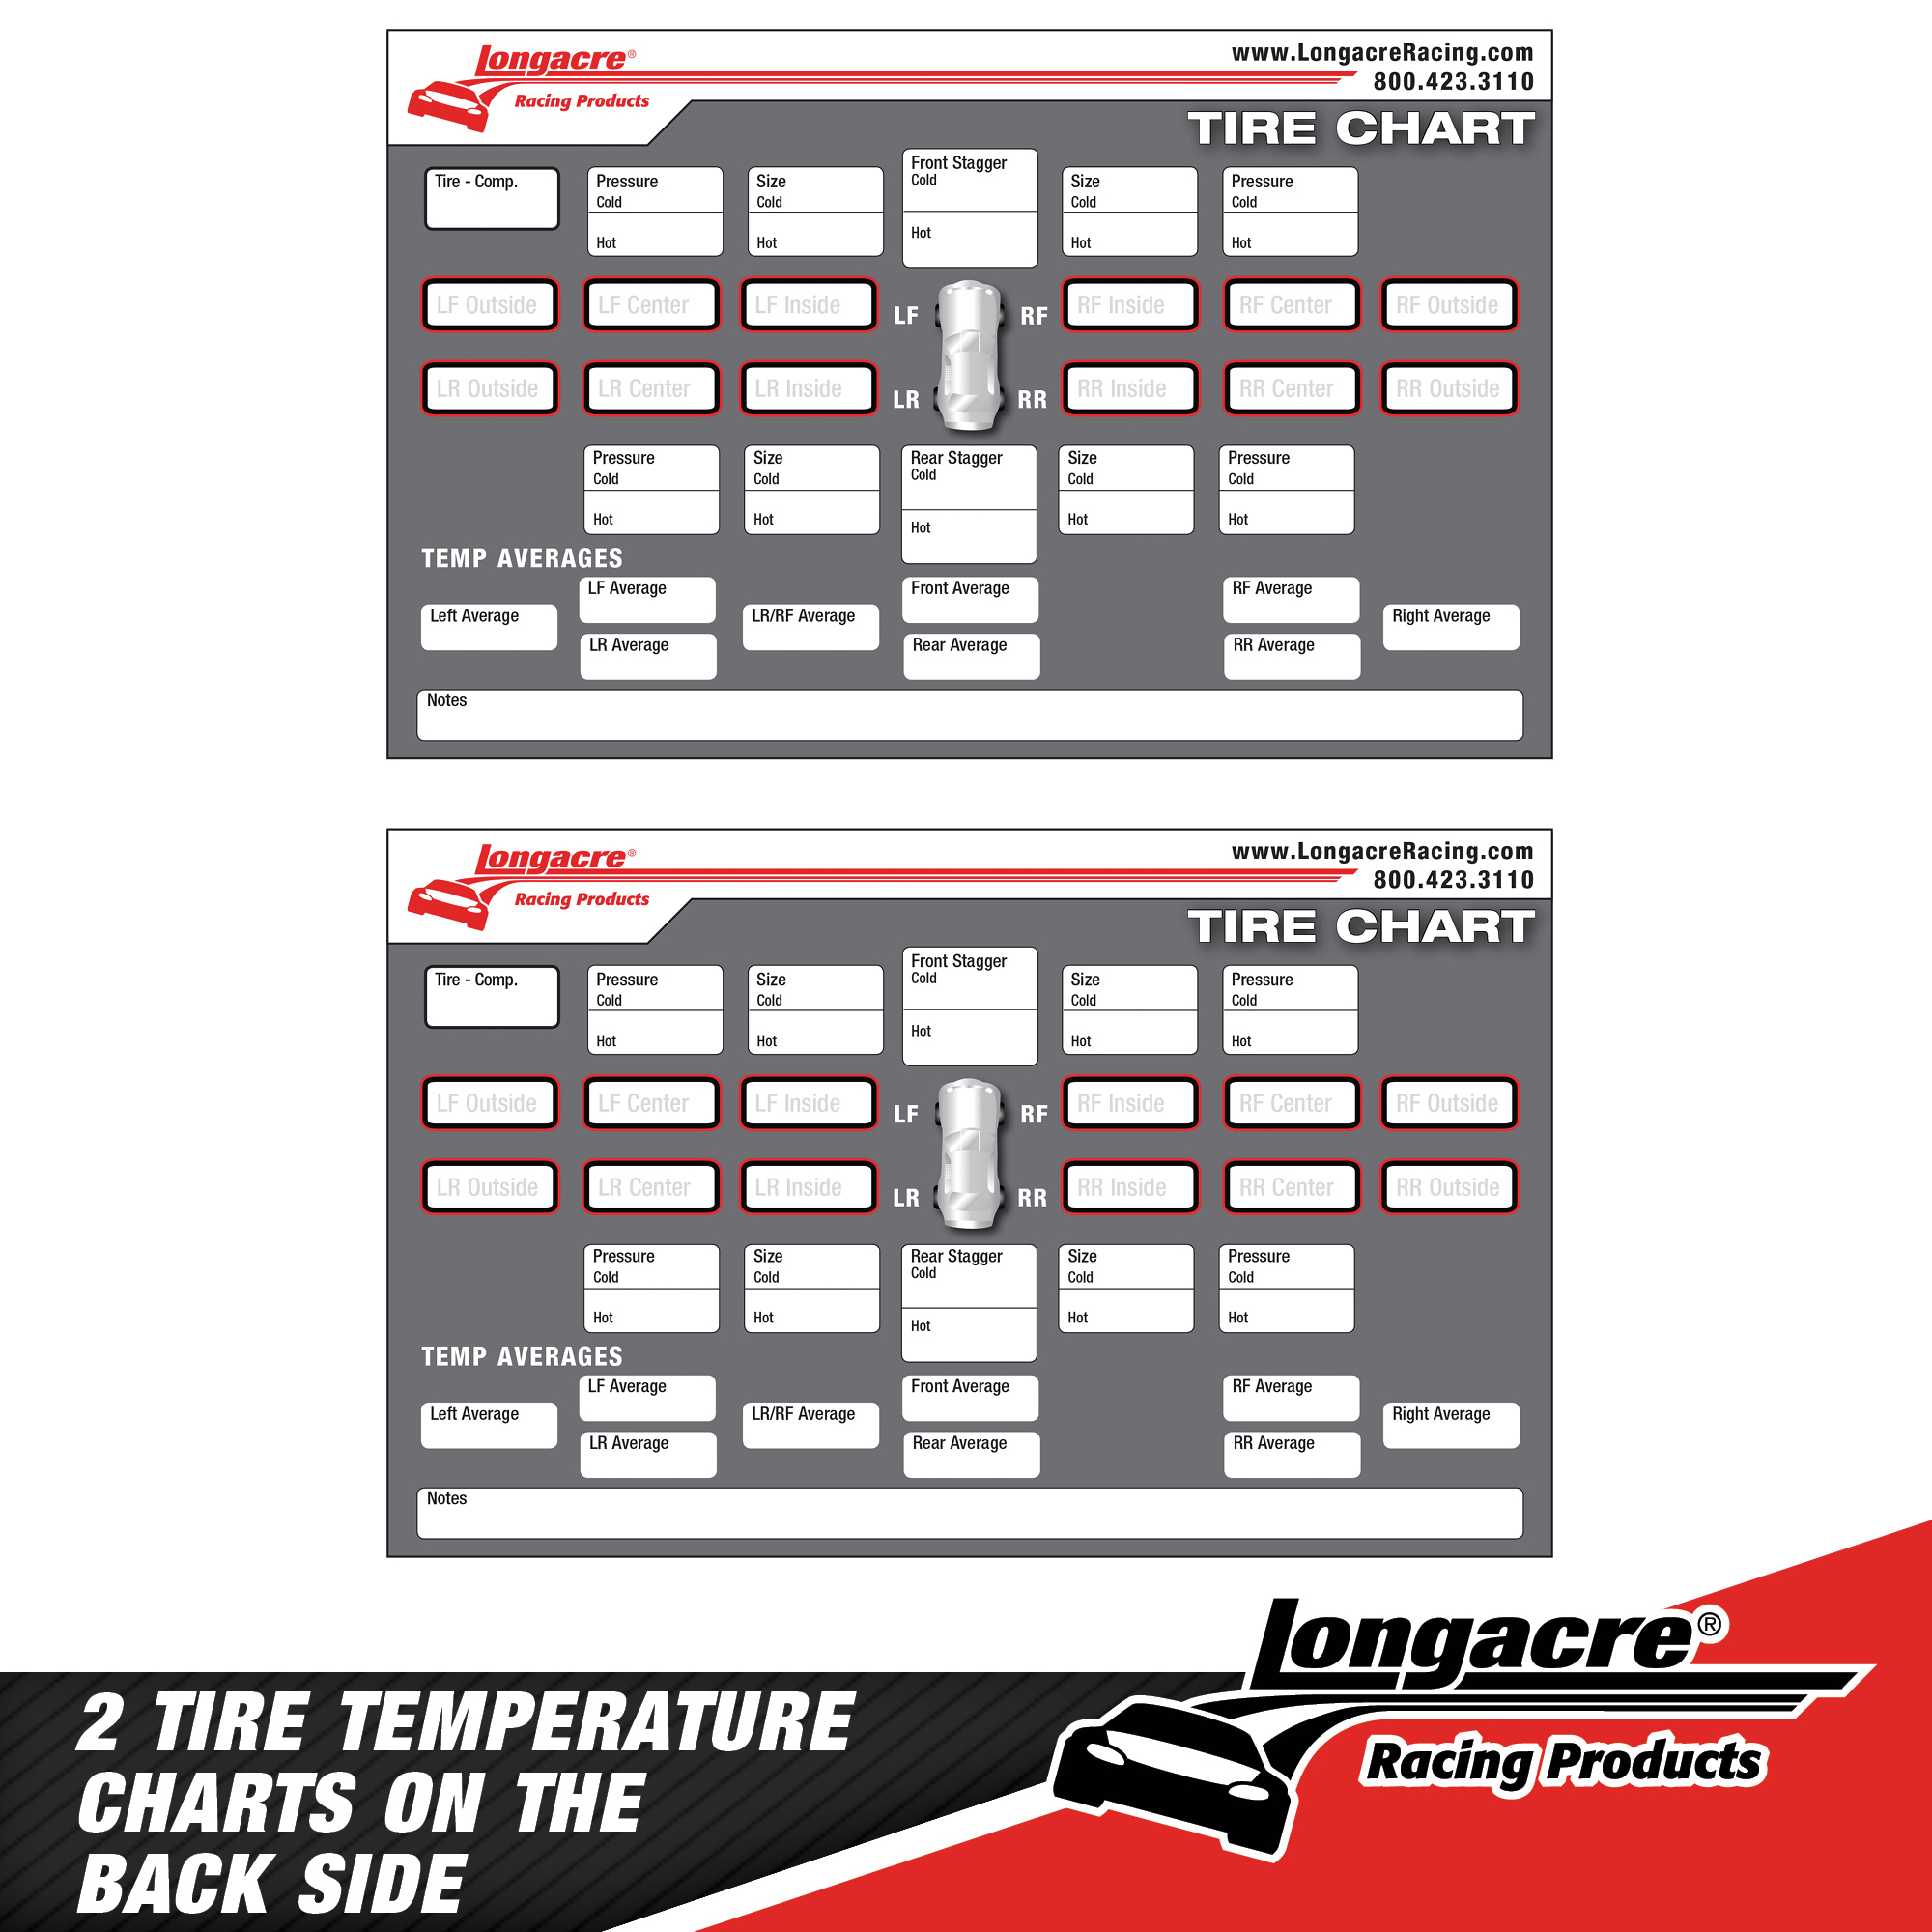 Chassis Set-up / Tire Chart